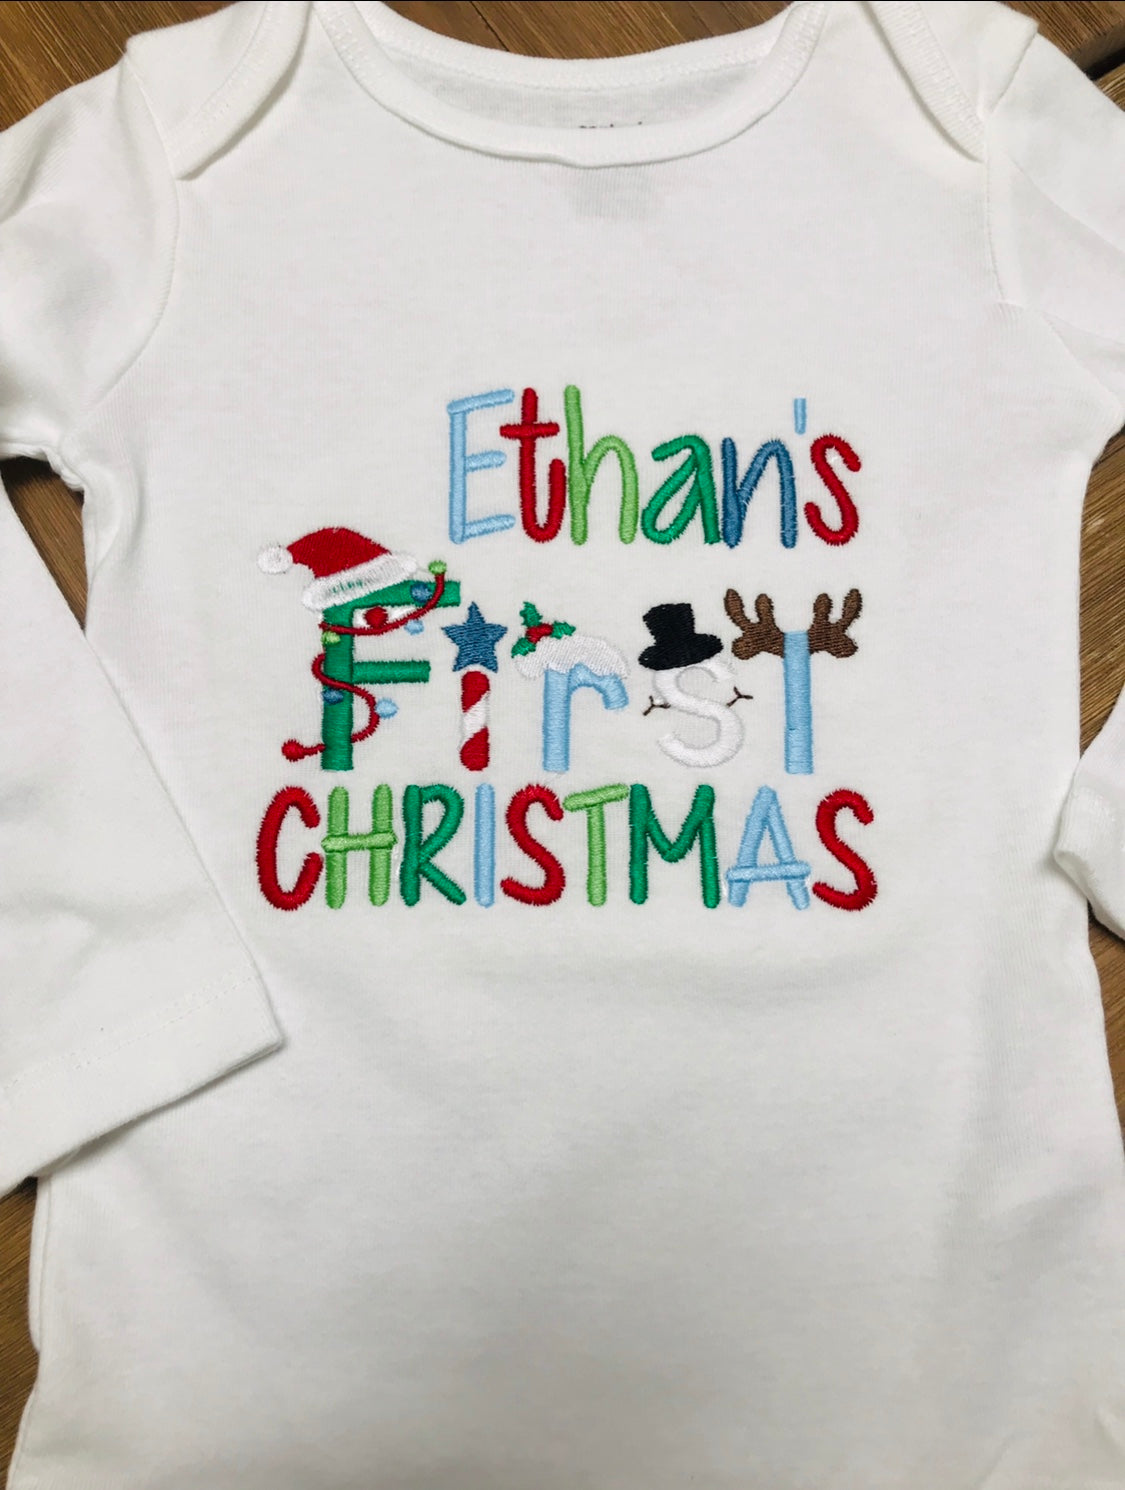 Baby Boy First Christmas Embroidered Bodysuit